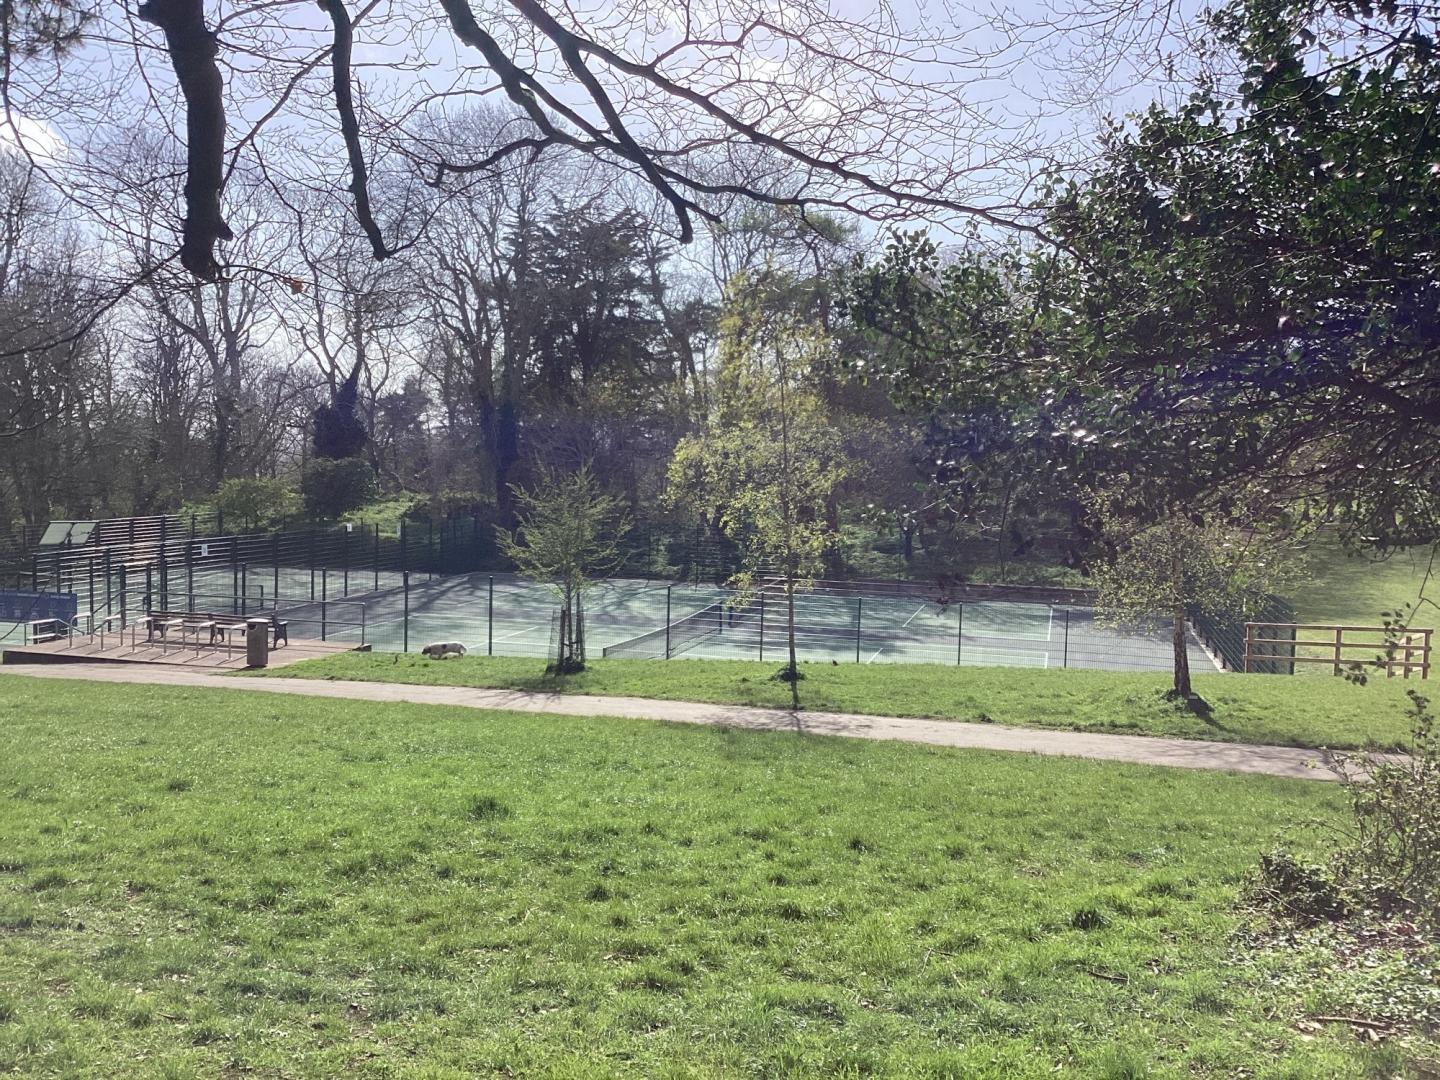 Ashcombe Park tennis courts from the side